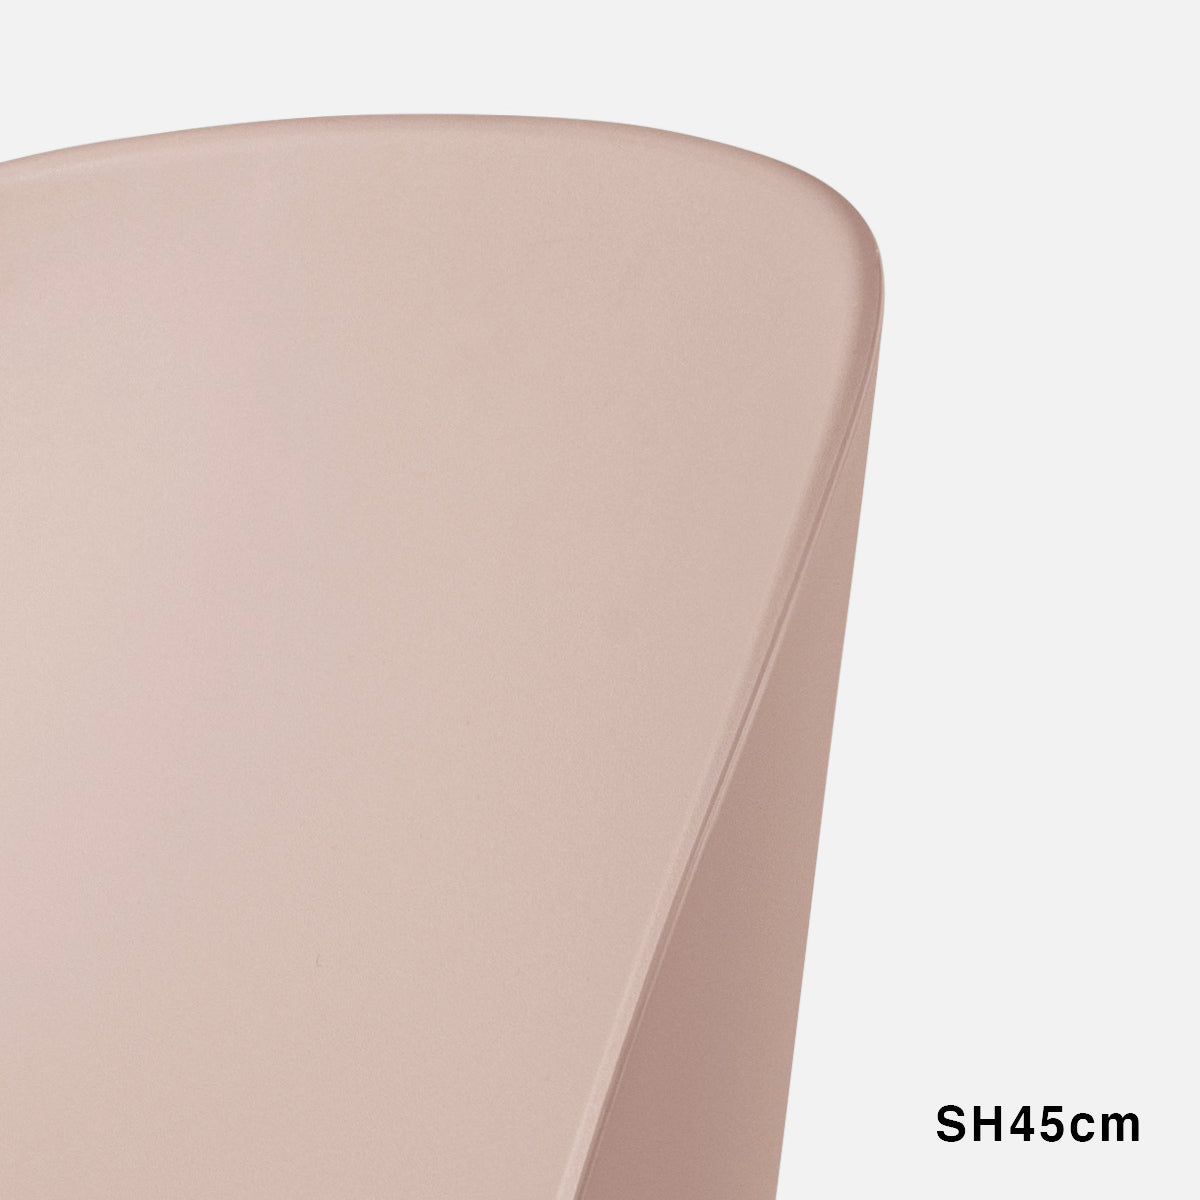 Beetle Chair Un-upholstered Sweet Pink Conic Base Brass 45cm